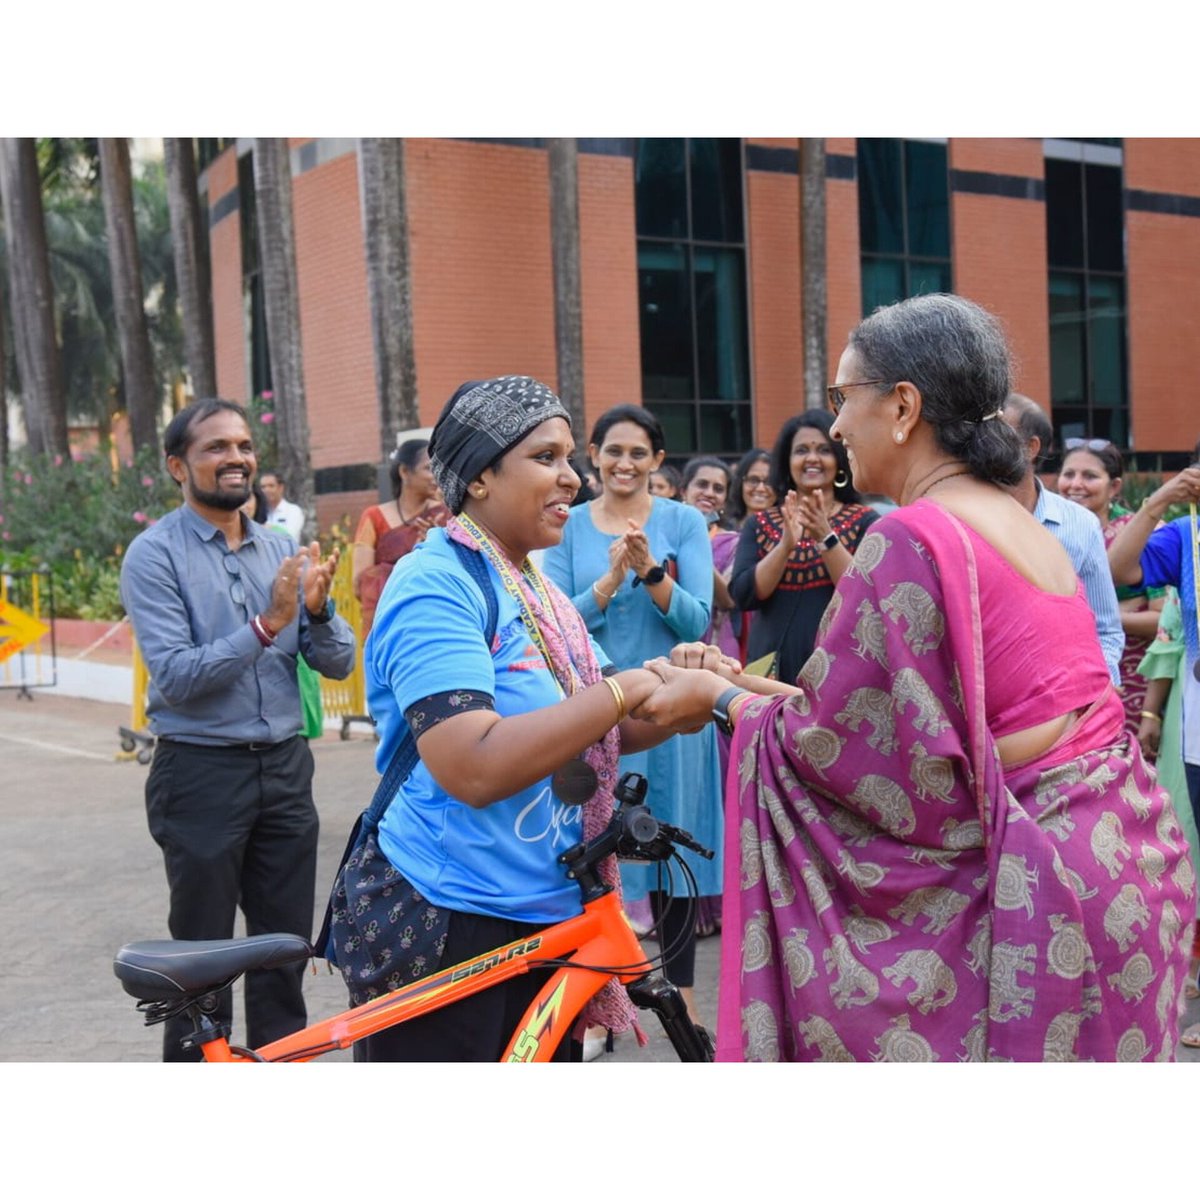 About today at MAHE,Manipal on the occasion of International Women's Day-2023 'The Fit Woman Cyclothon' 🚴‍♀️🚴‍♀️

#MAHEManipal #instituteofeminence #internationalwomensday
#cyclothon #mentalhealth #womenempowerment #W20 #G20 #Equality #G20Presidency